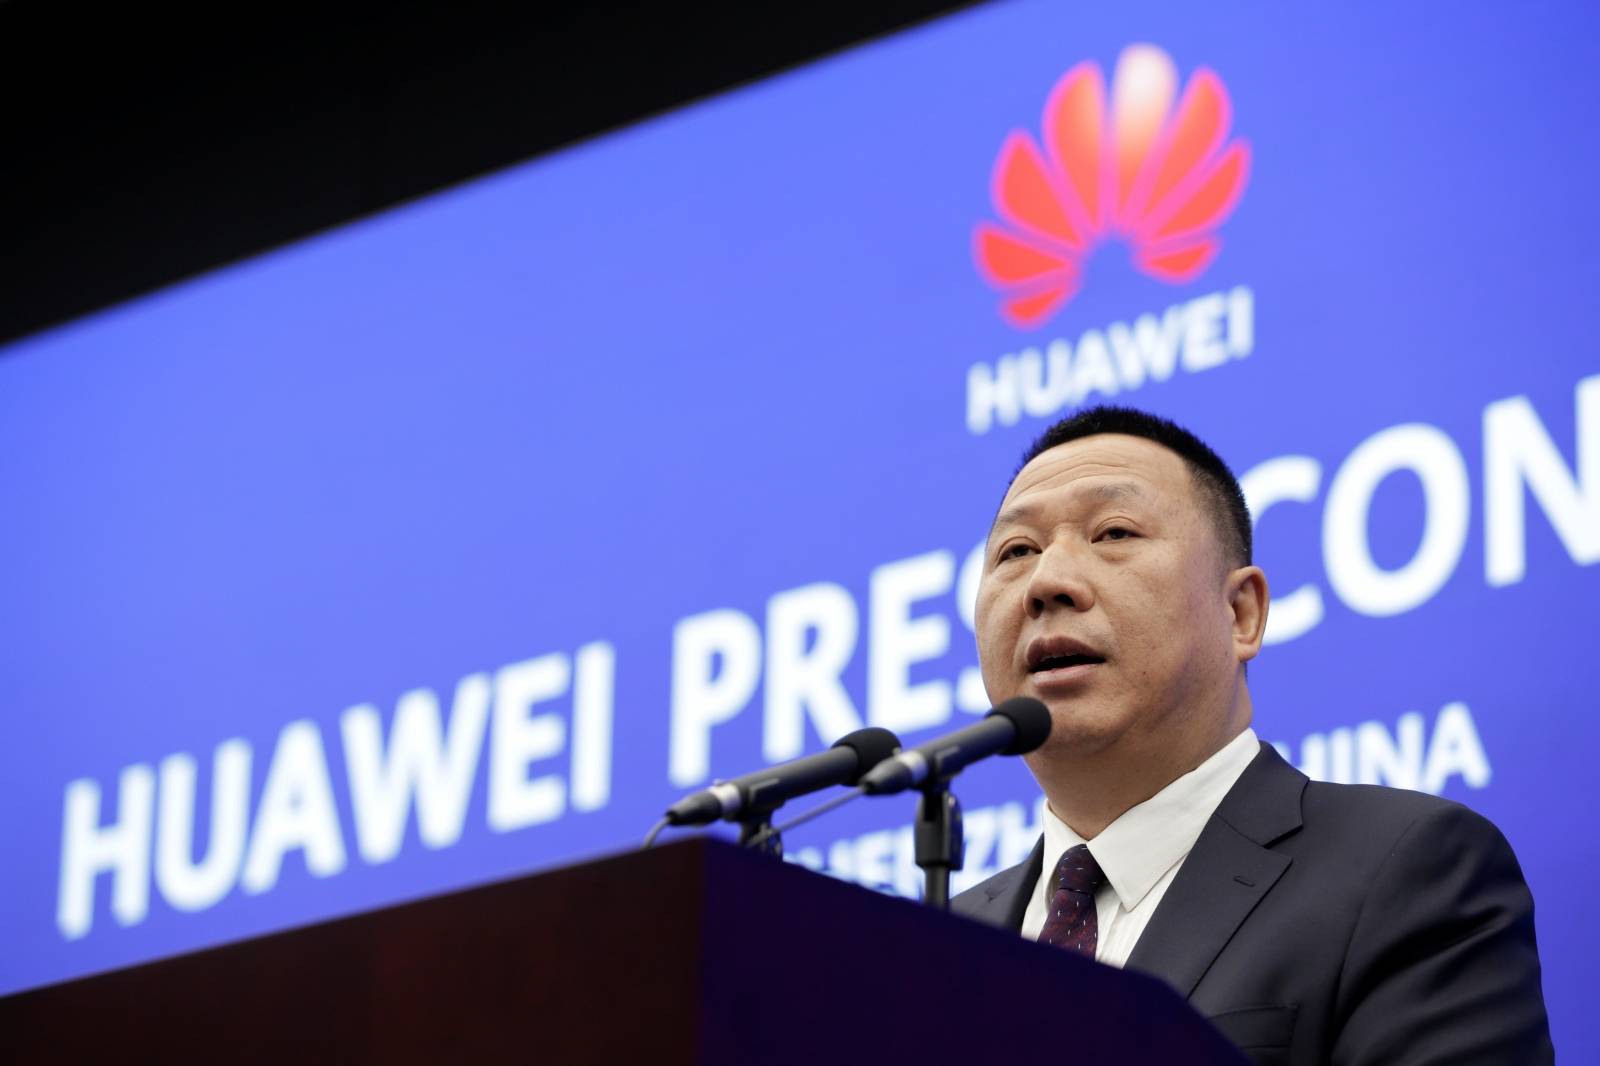 Huawei's Chief Legal Officer Song Liuping attends a news conference on Huaweiâs ongoing legal action against the U.S. governmentâs National Defense Authorization Act (NDAA) action at its headquarters in Shenzhen